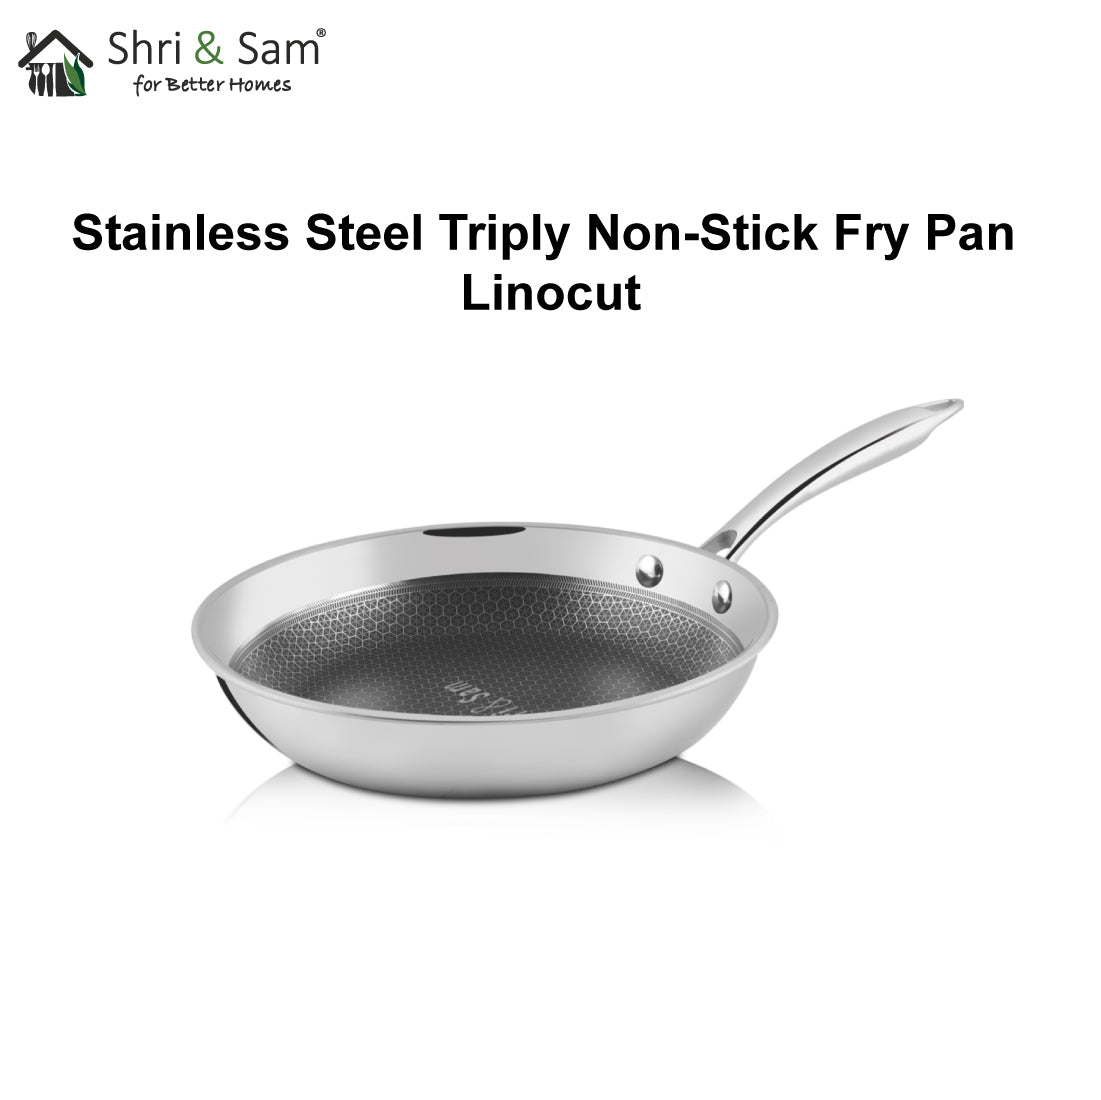 Stainless Steel Triply Non-Stick Fry Pan Linocut